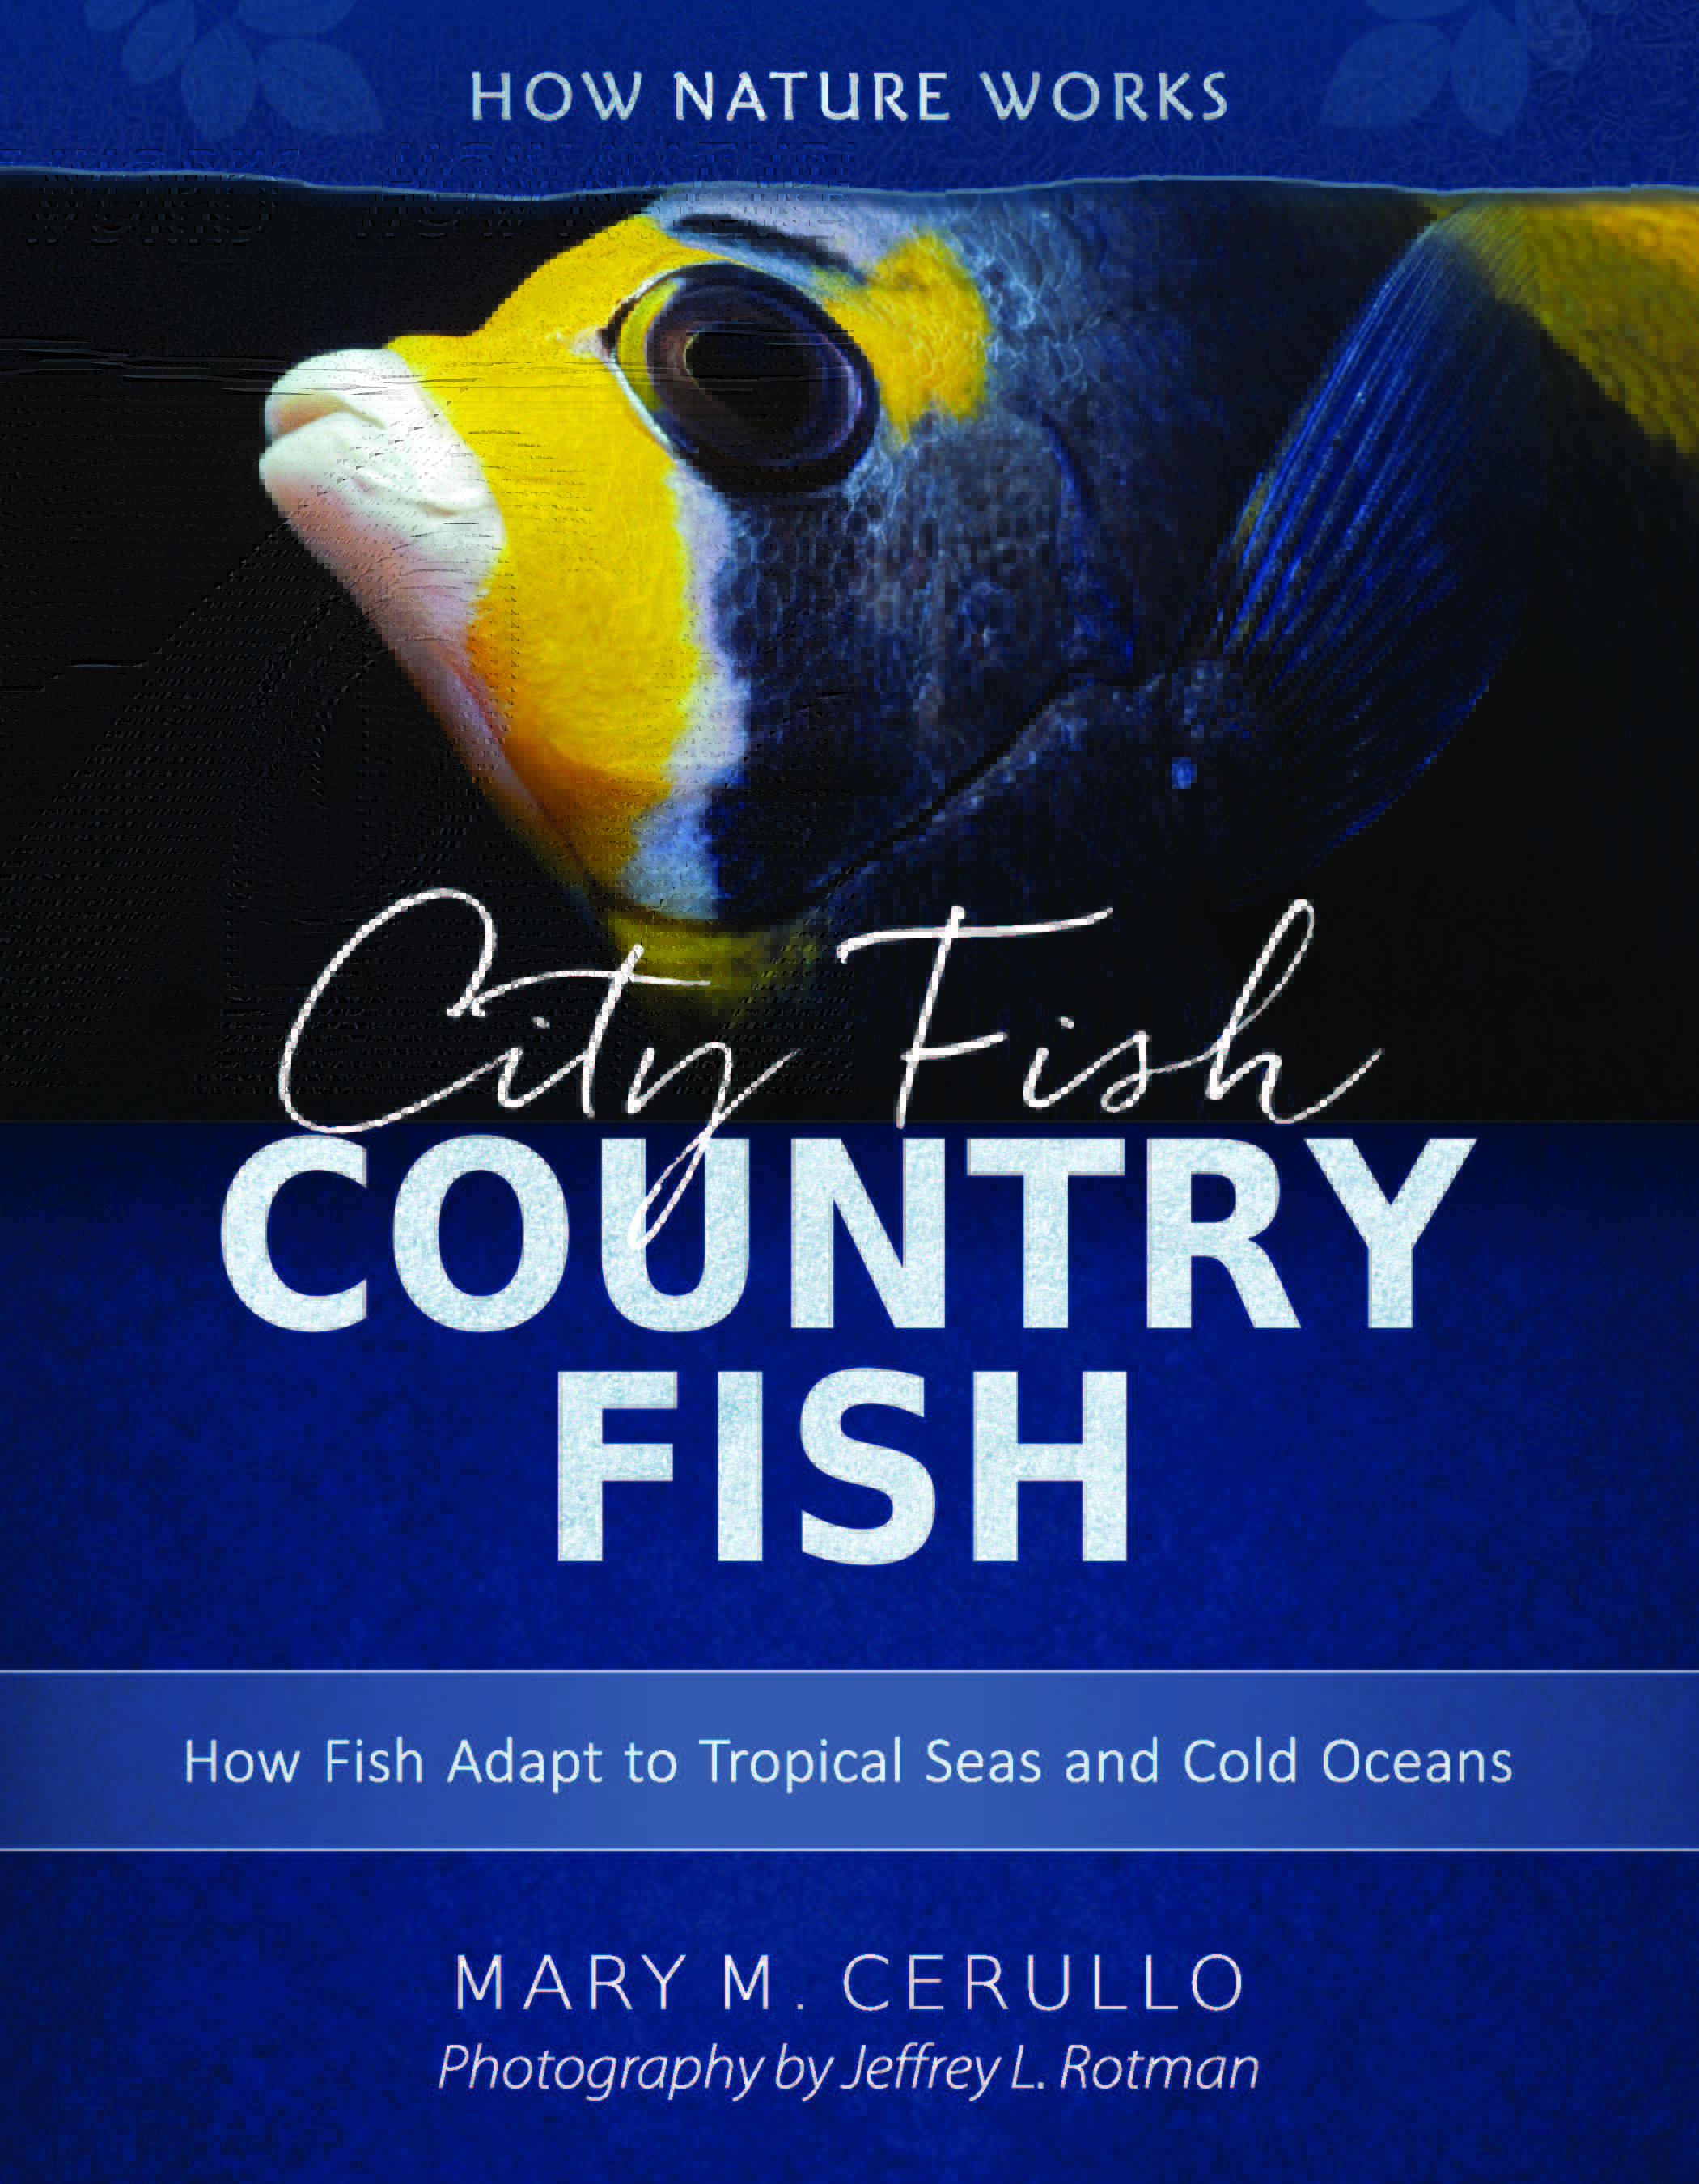 City Fish Country Fish: How Fish Adapt to Tropical Seas and Cold Oceans